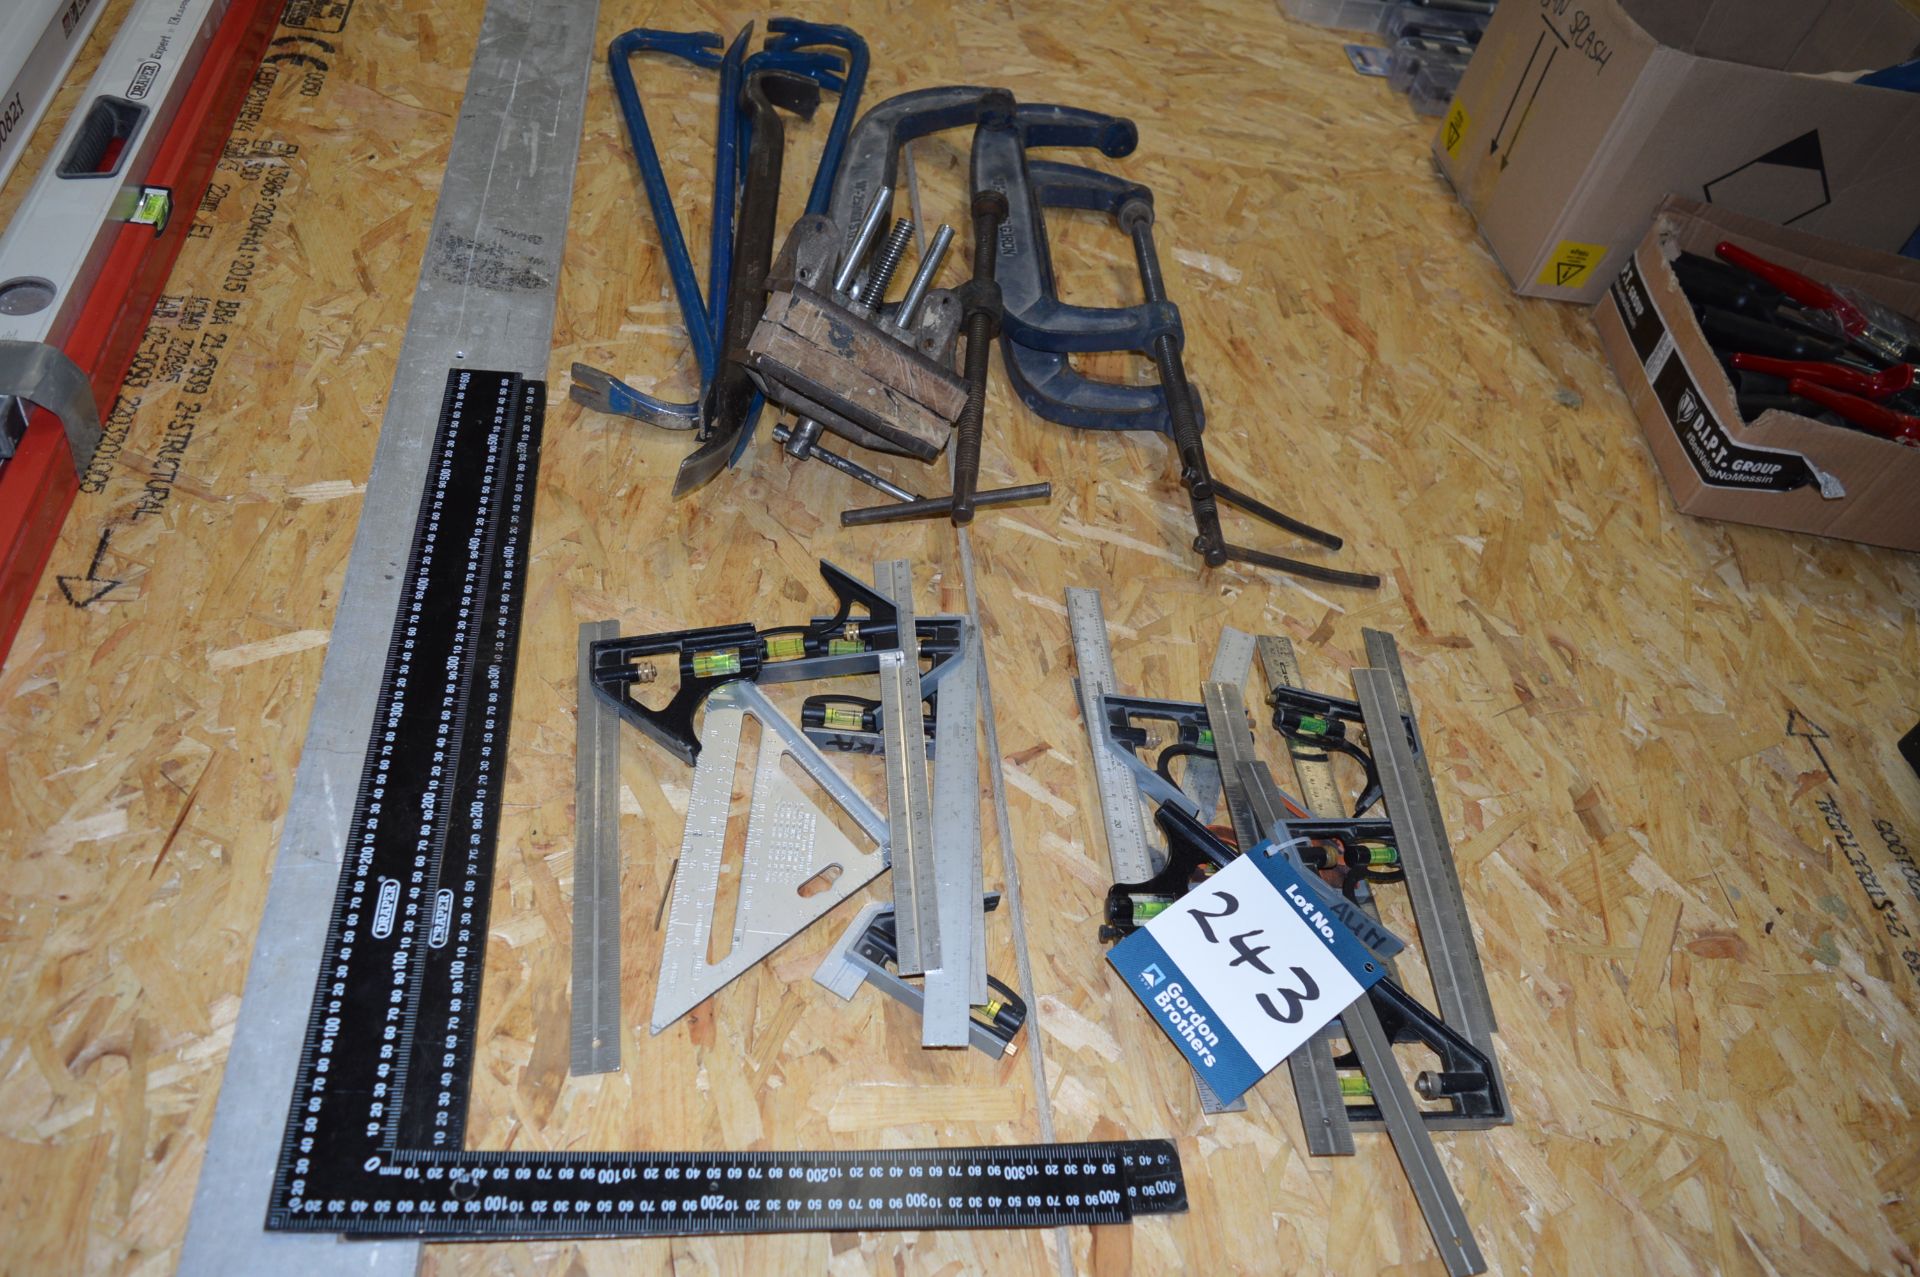 Quantity of hand tools including clamps, crow bars, squares, etc.